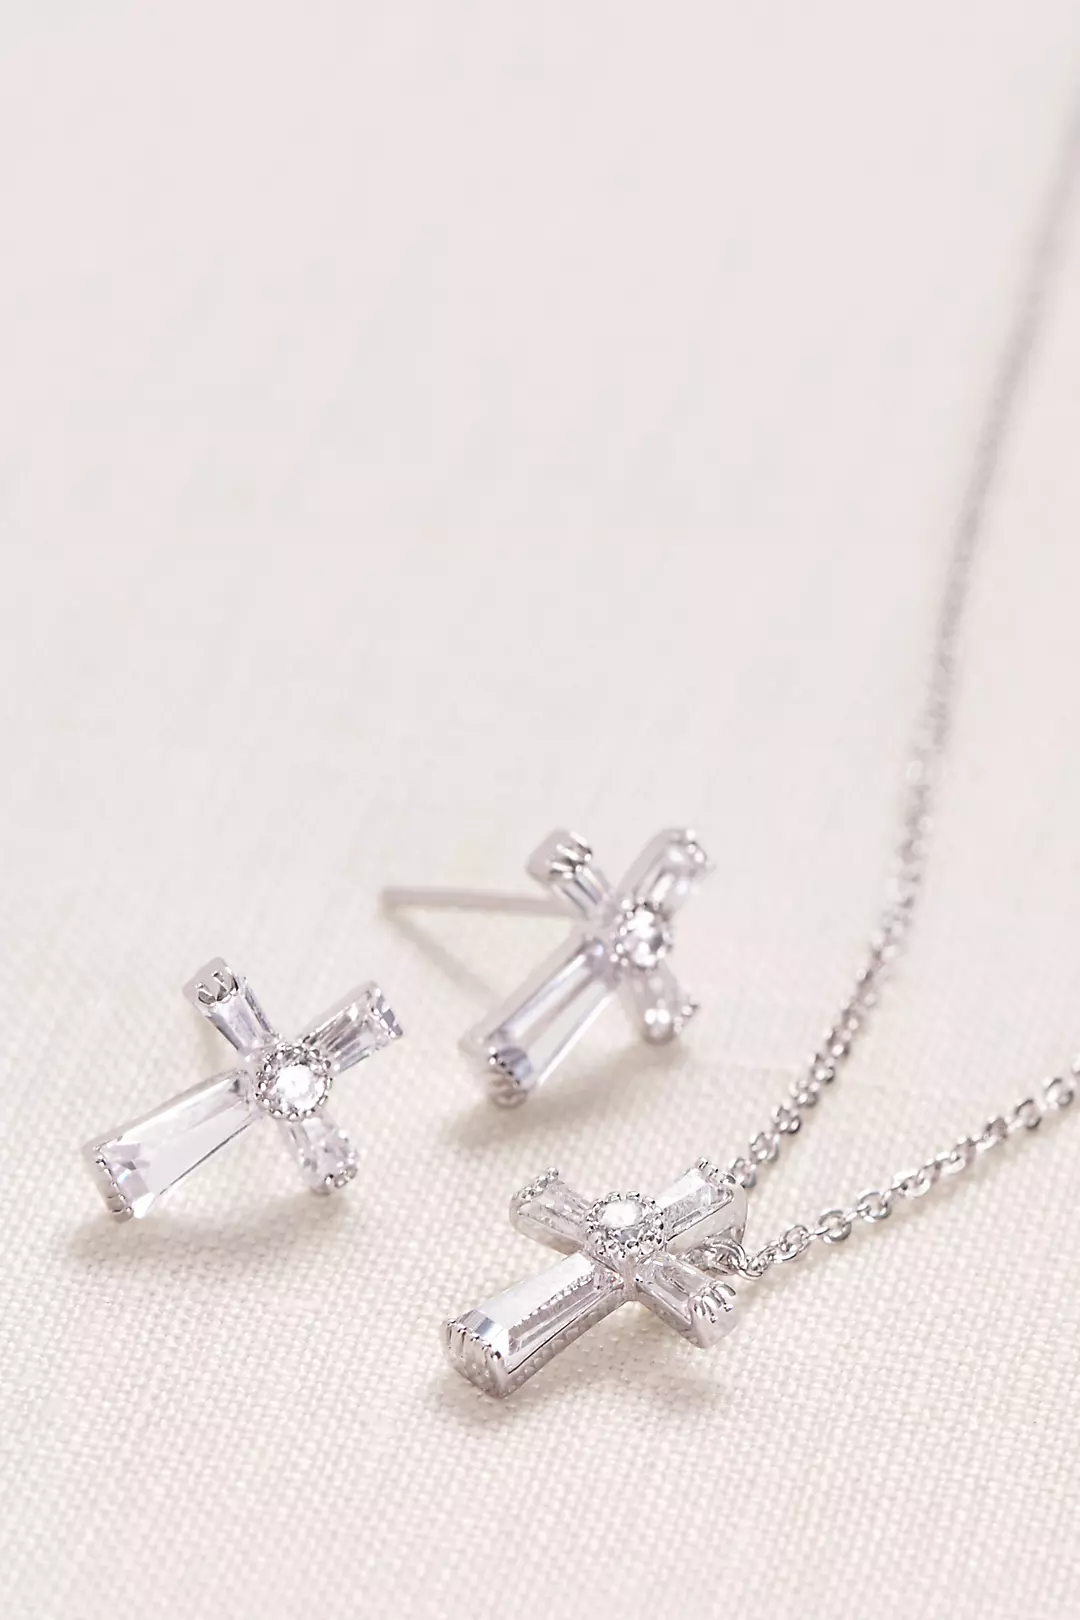 Emerald Cut Crystal Cross Necklace and Earring Set Image 2